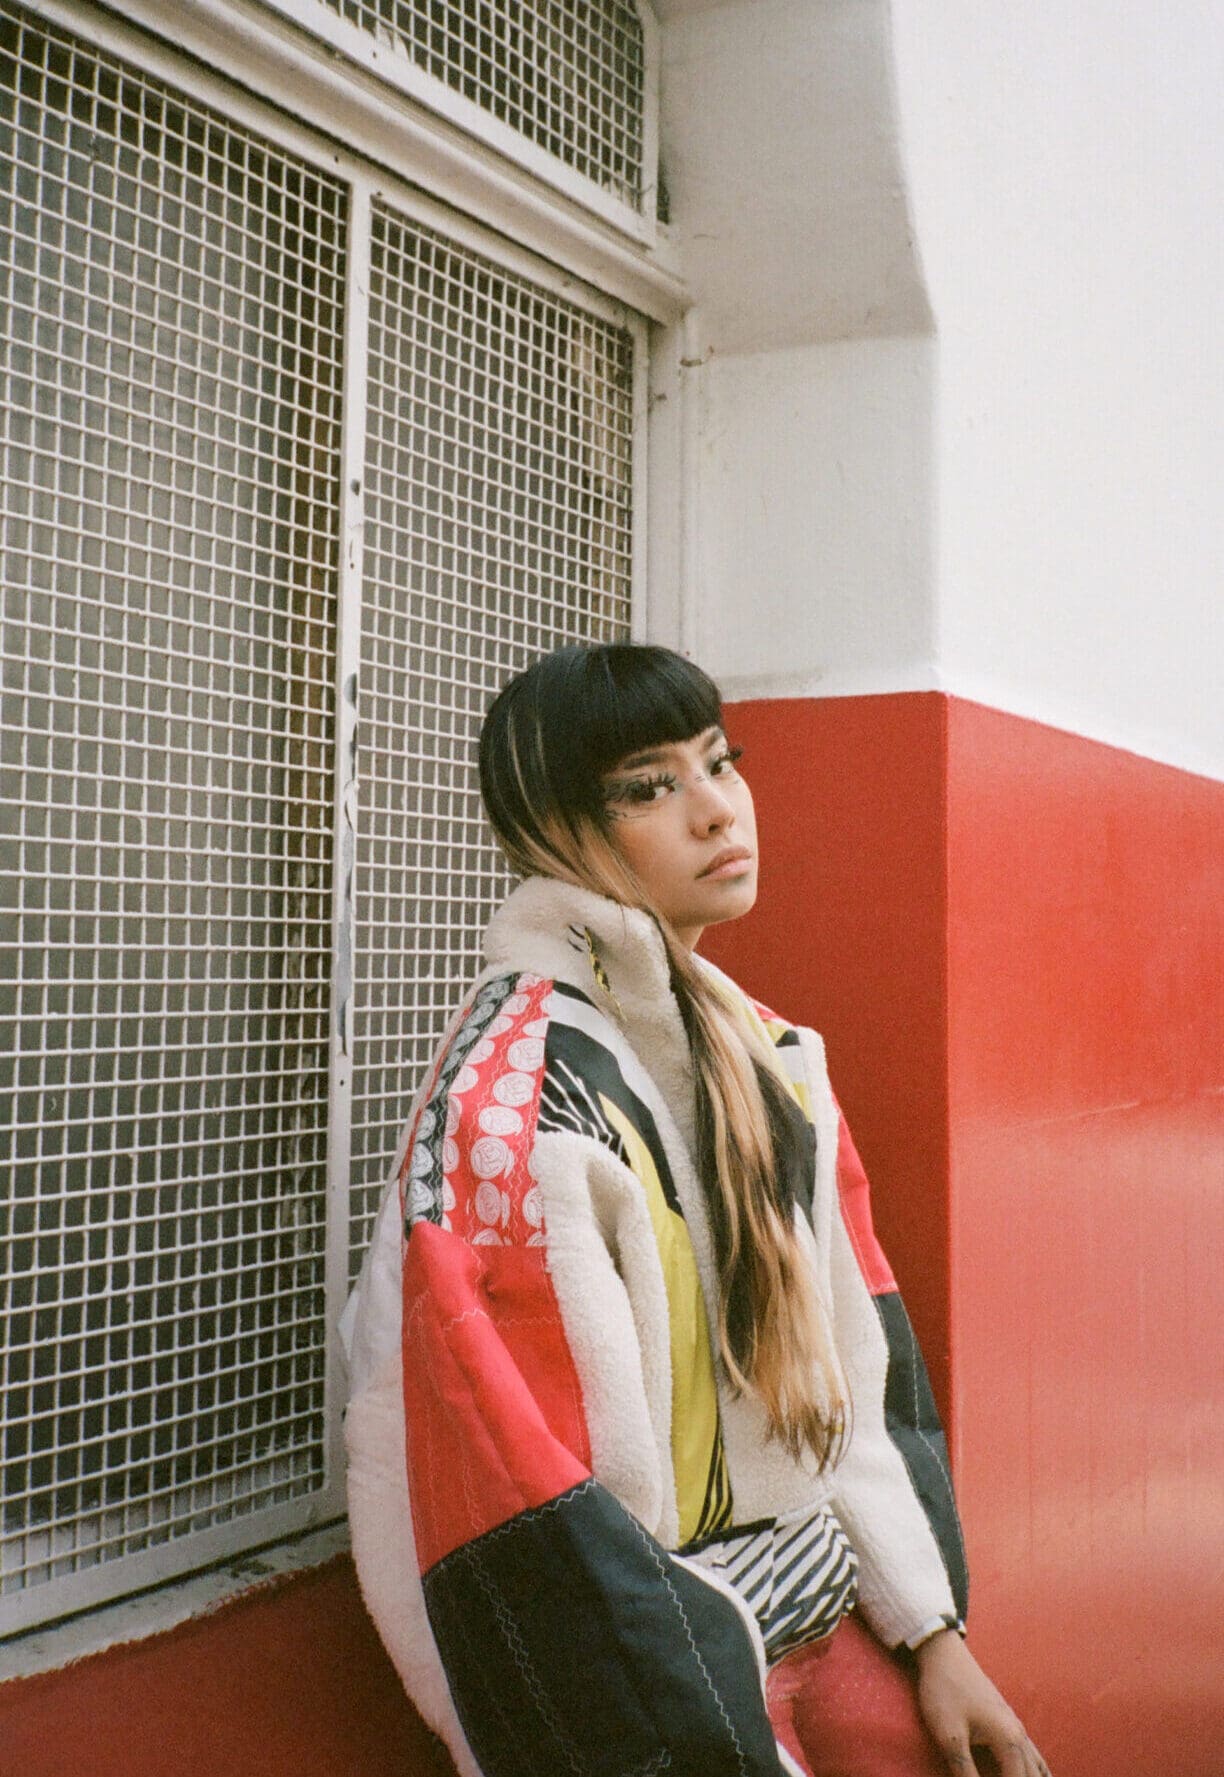 An interview with Thai pop singer Pyra | Pyra sat in front of a metal window grid, leaning against a red and white wall.